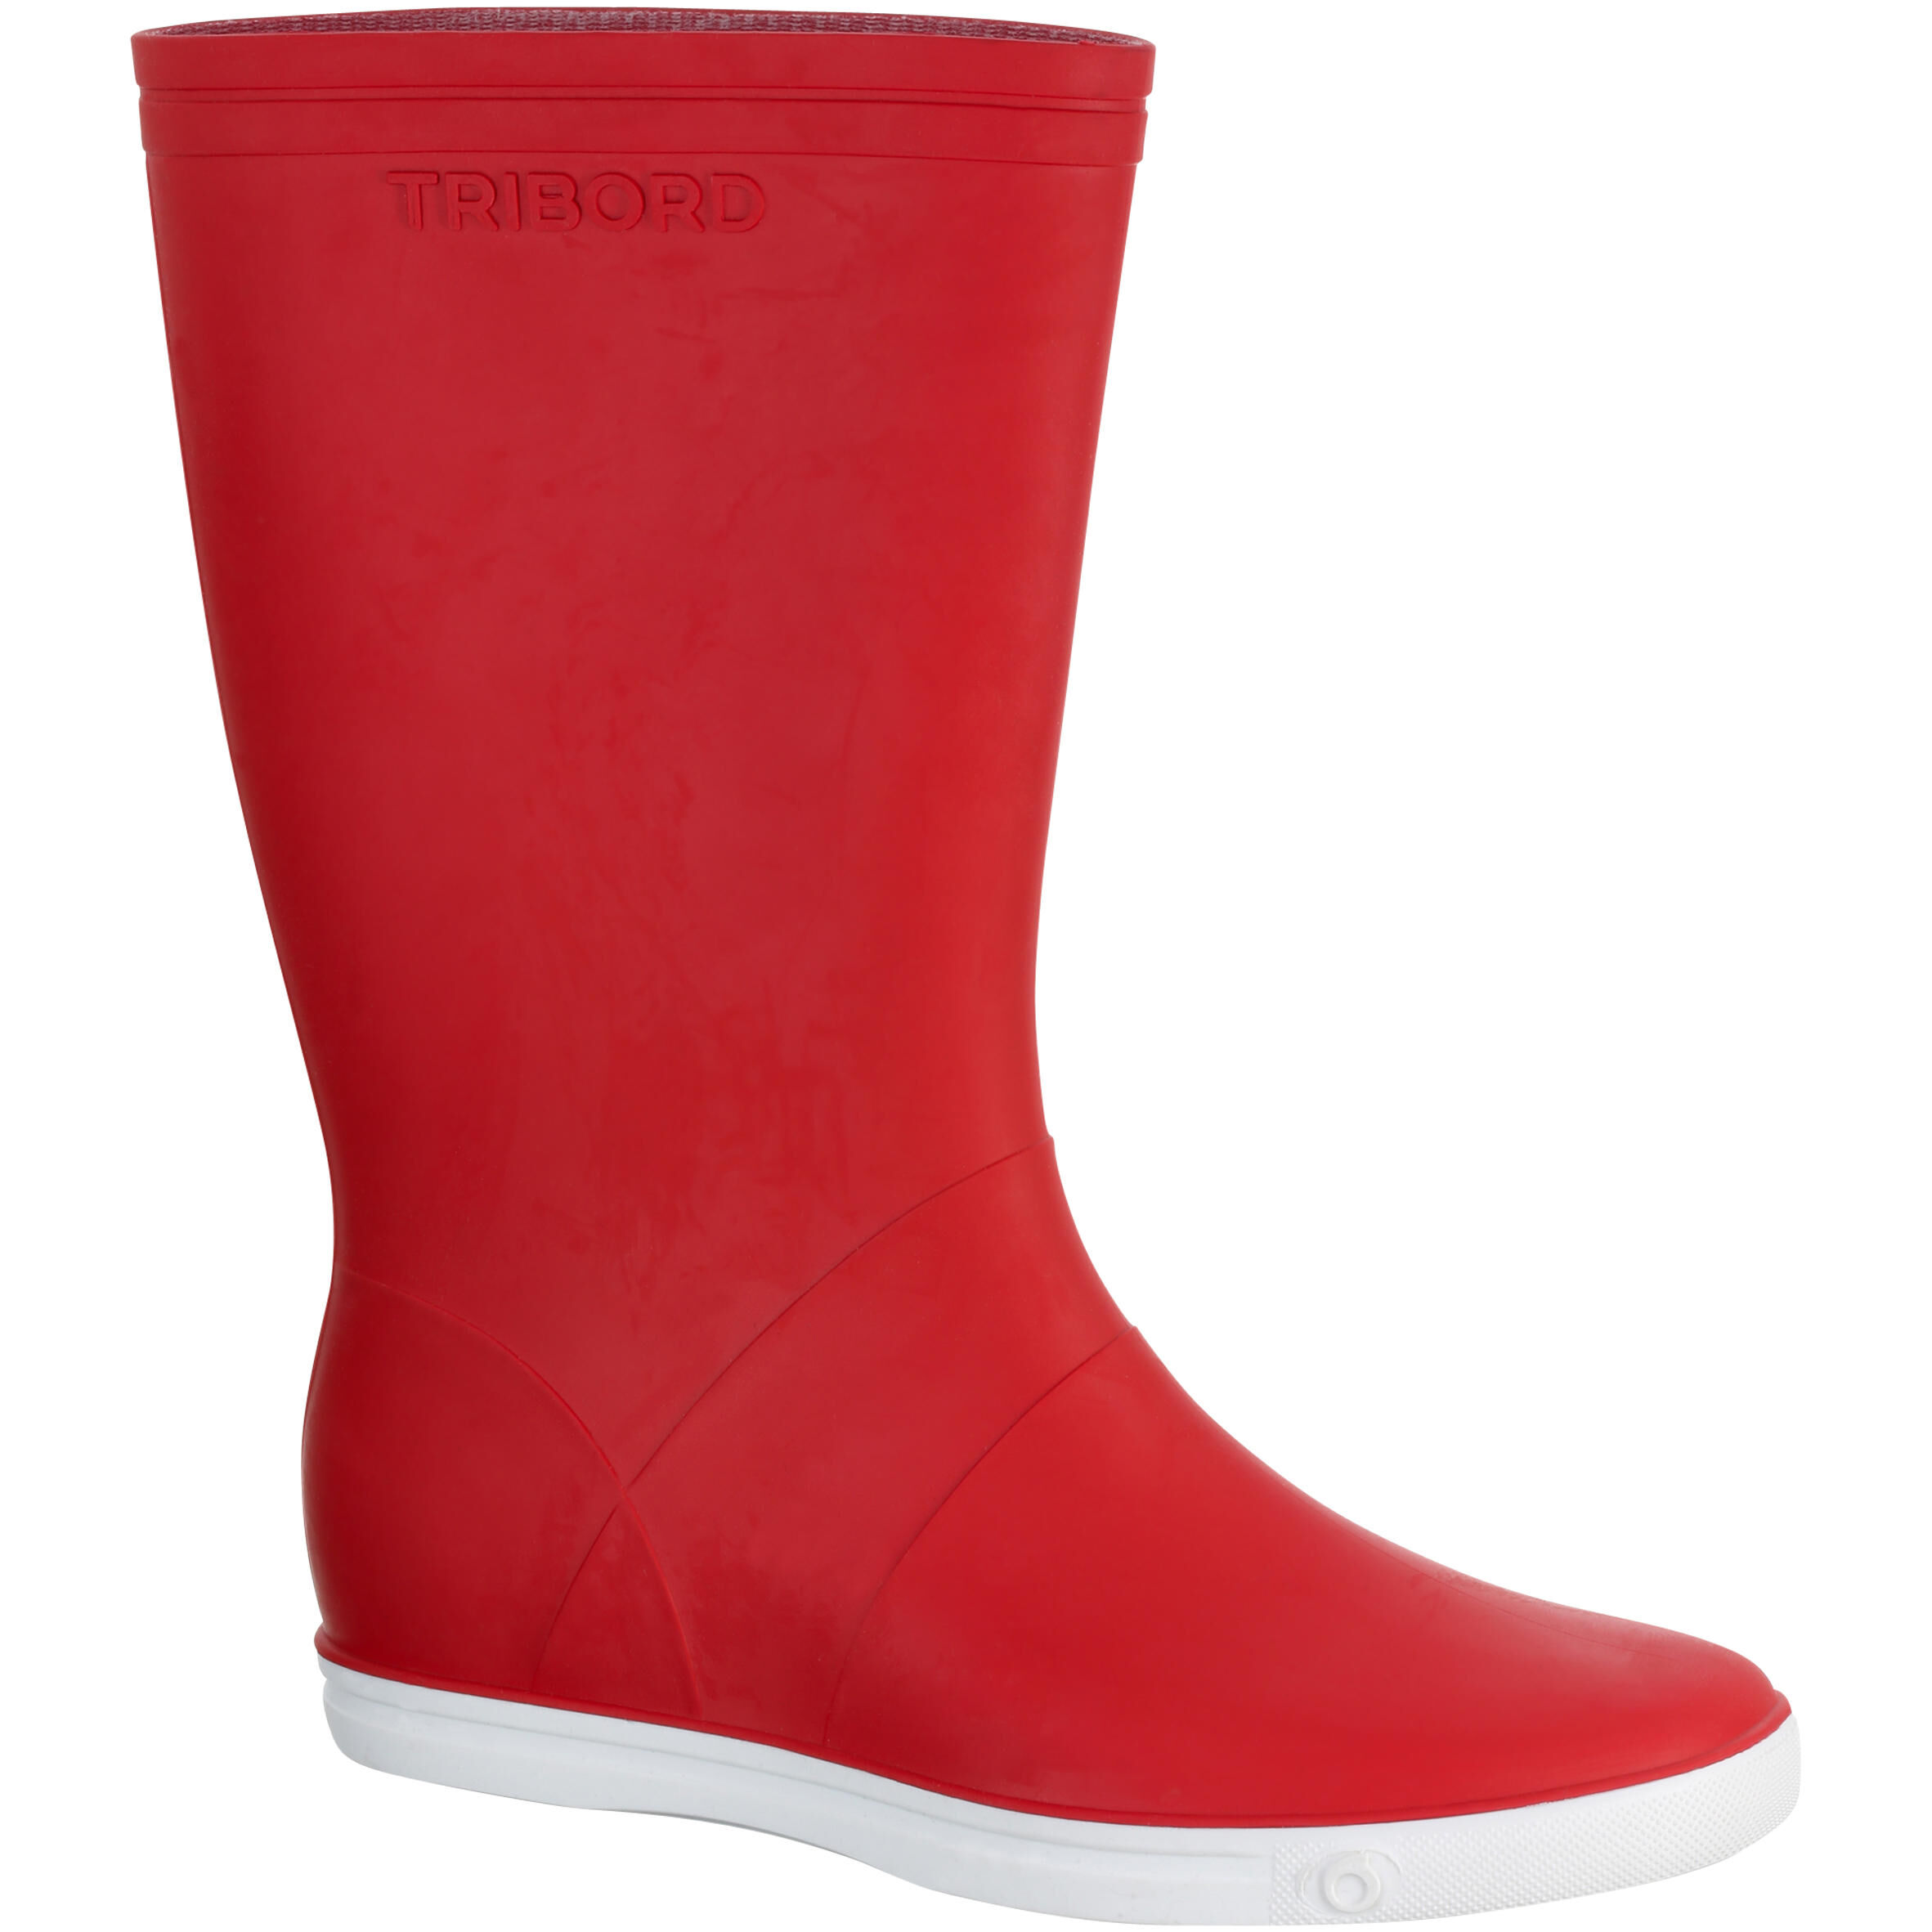 TRIBORD Sailing 100 Adult Wellies  - Red